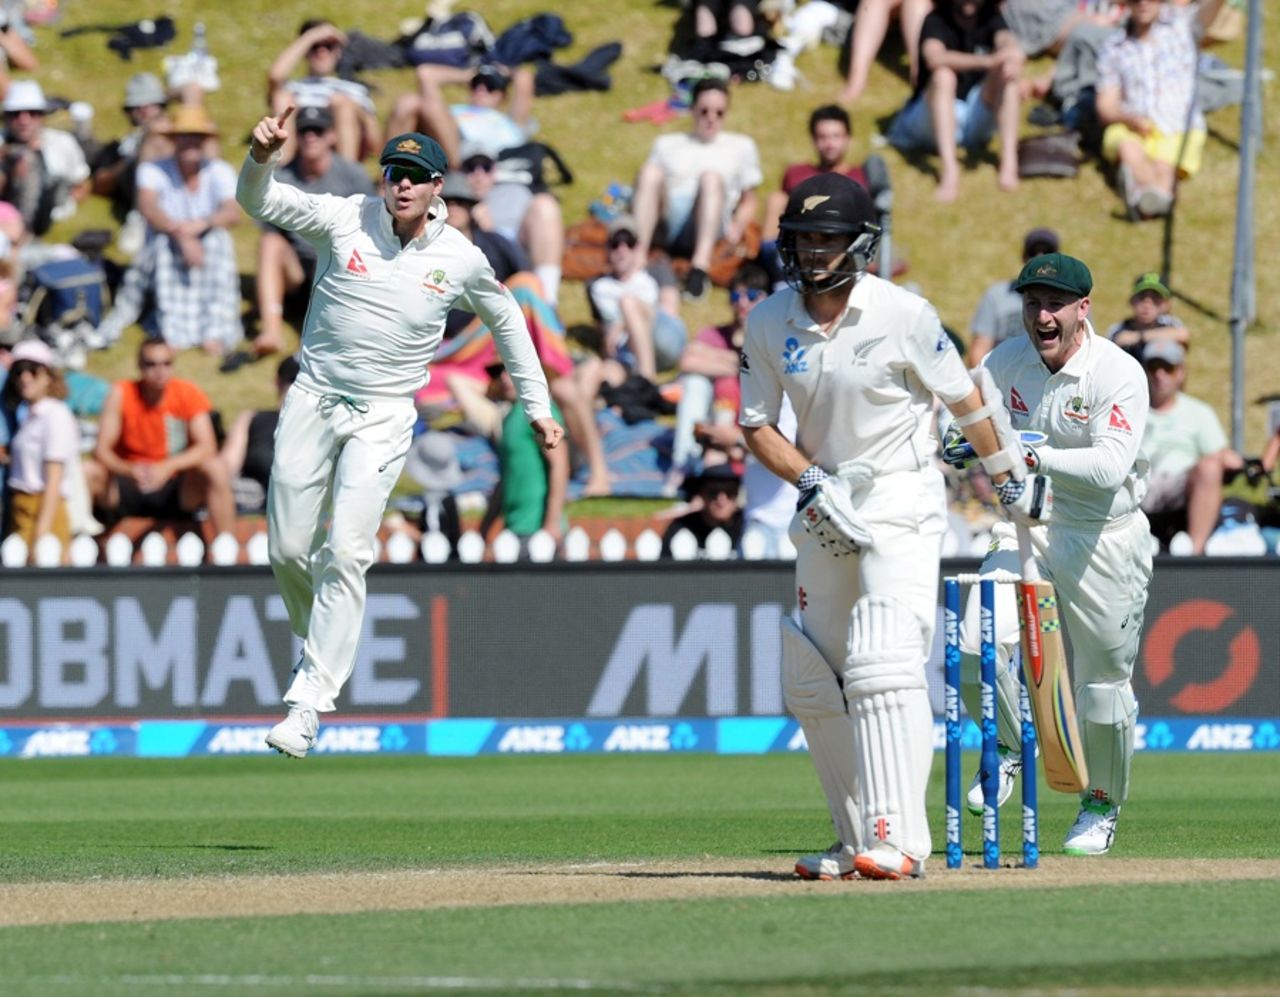 Steven Smith and Peter Nevill celebrate after having Kane Williamson caught behind, New Zealand v Australia, 1st Test, Wellington, 3rd day, February 14, 2016